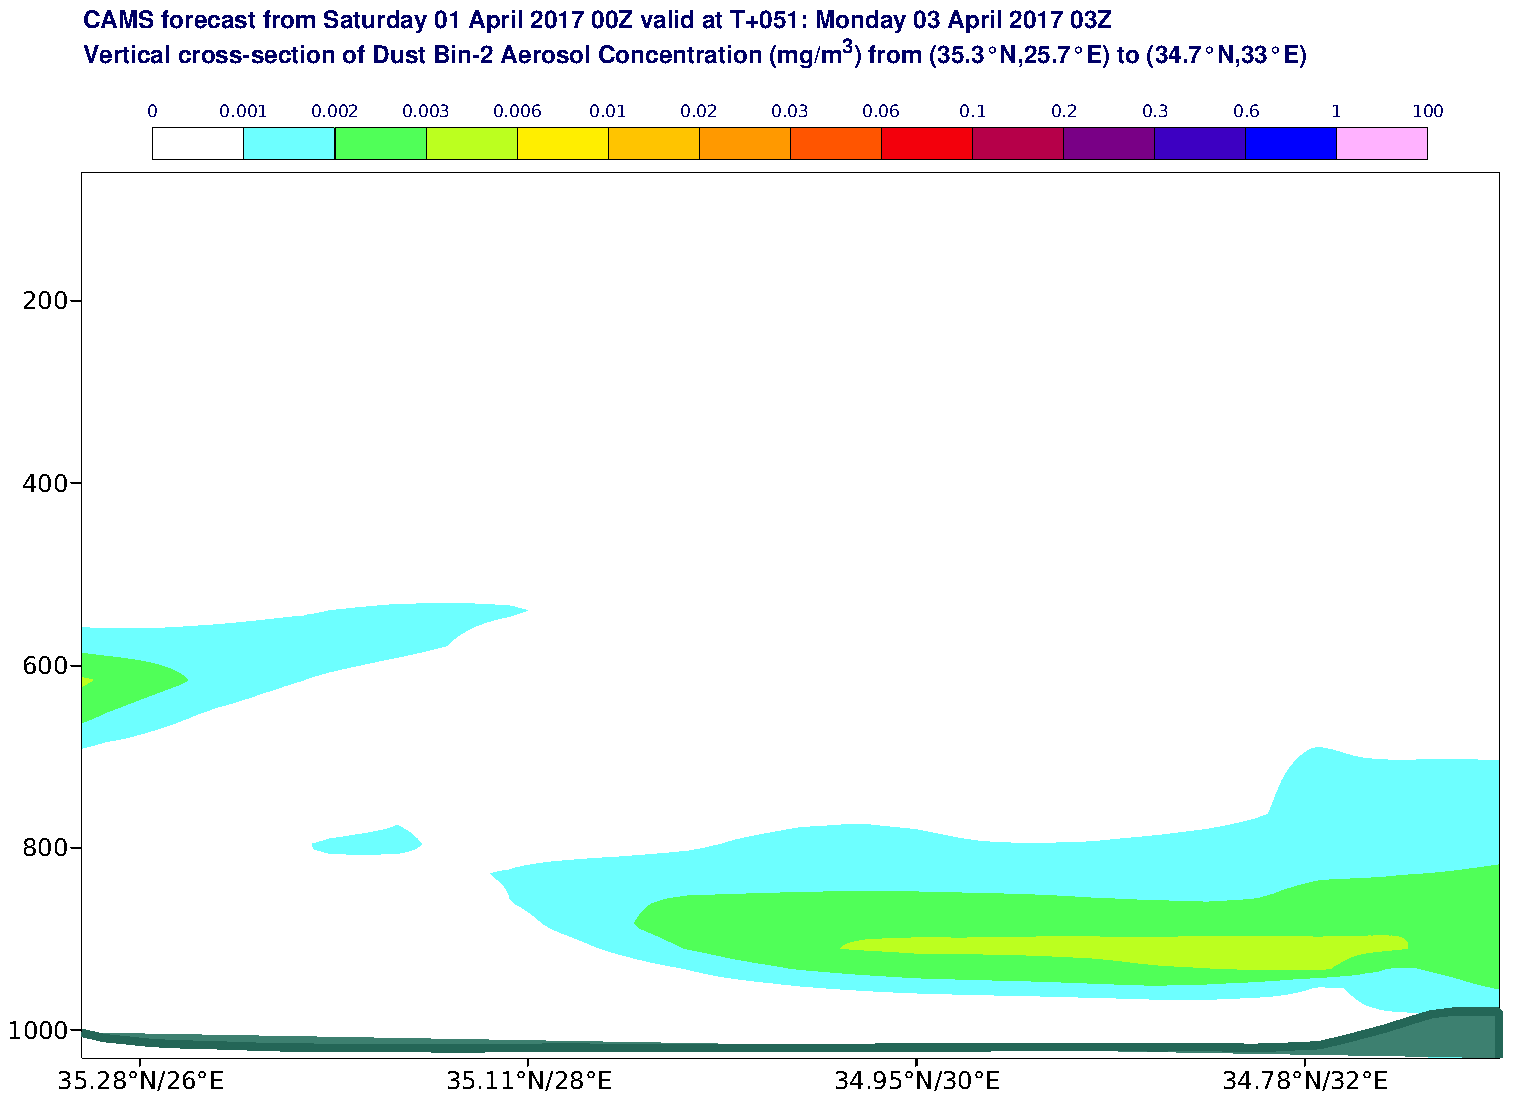 Vertical cross-section of Dust Bin-2 Aerosol Concentration (mg/m3) valid at T51 - 2017-04-03 03:00